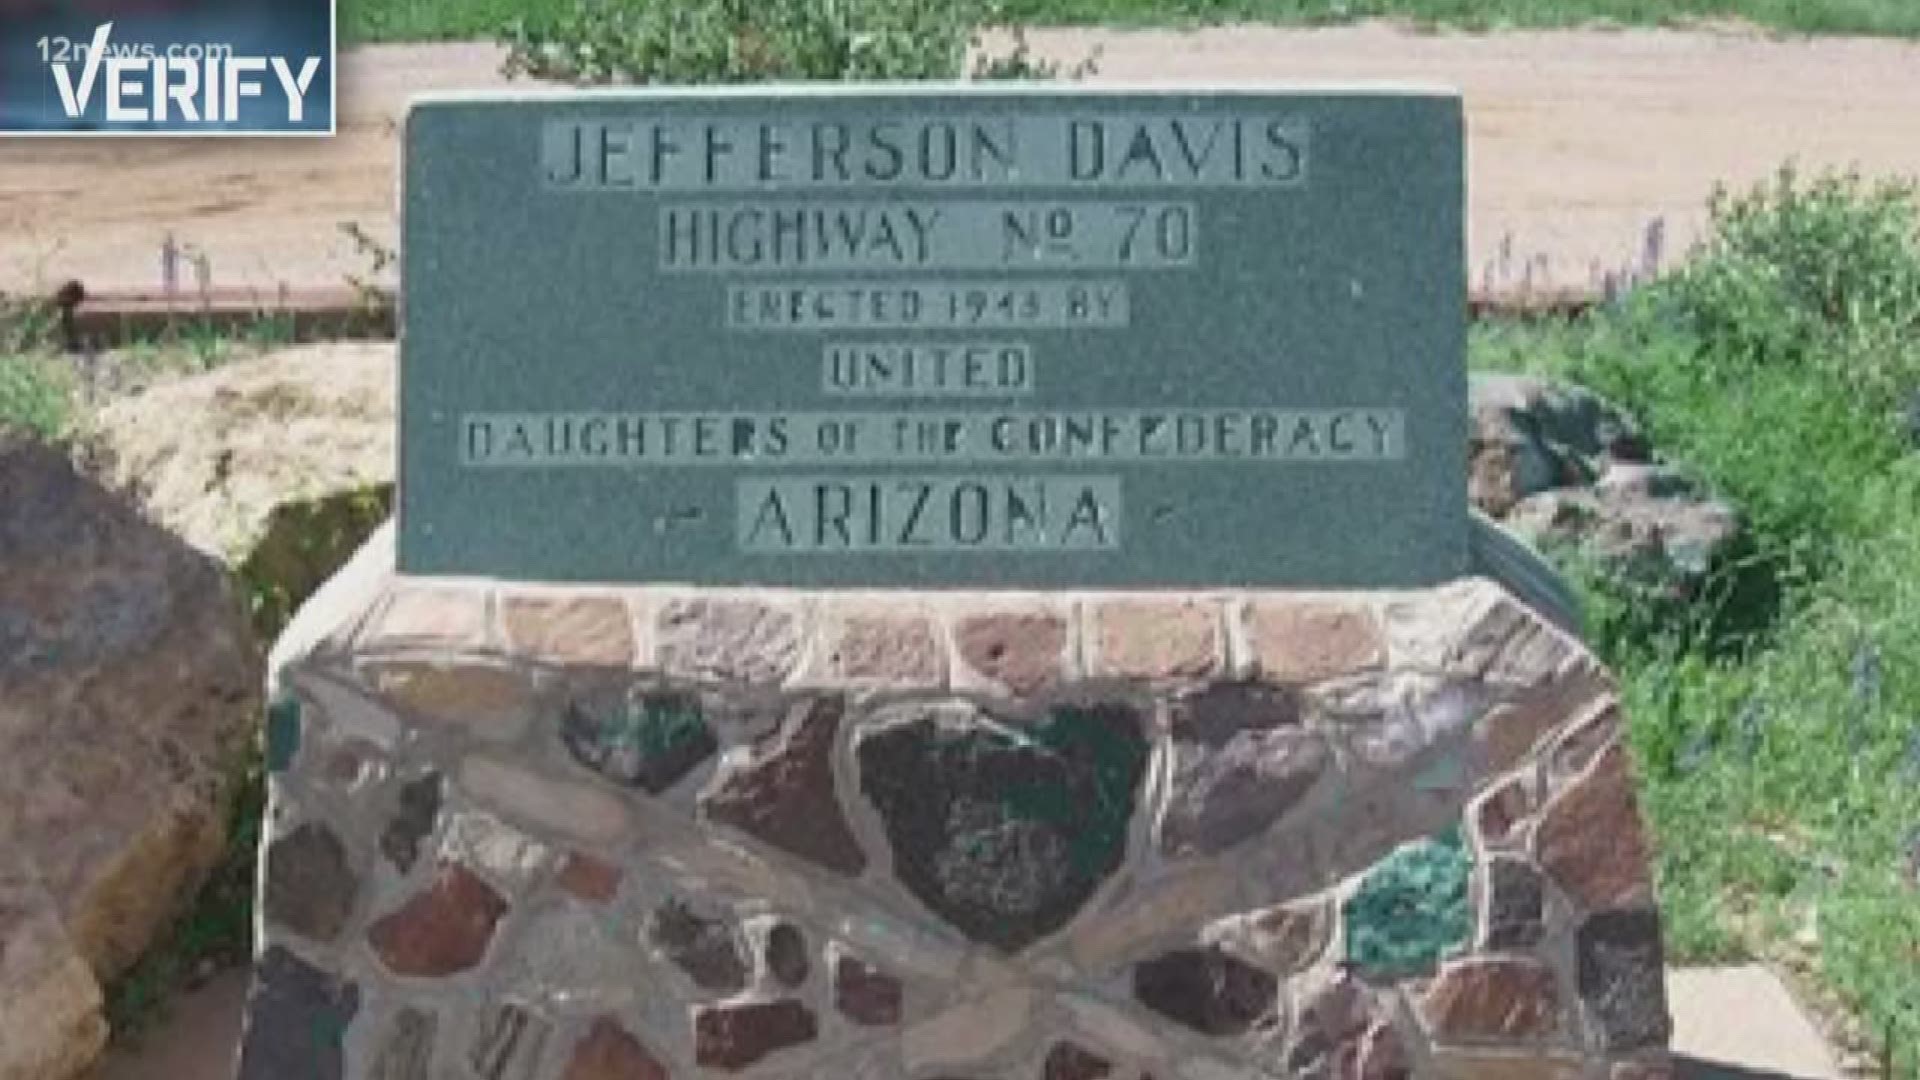 ADOT says the Jefferson Davis Highway no longer exists and it was never granted historic status, so who owns the monument?